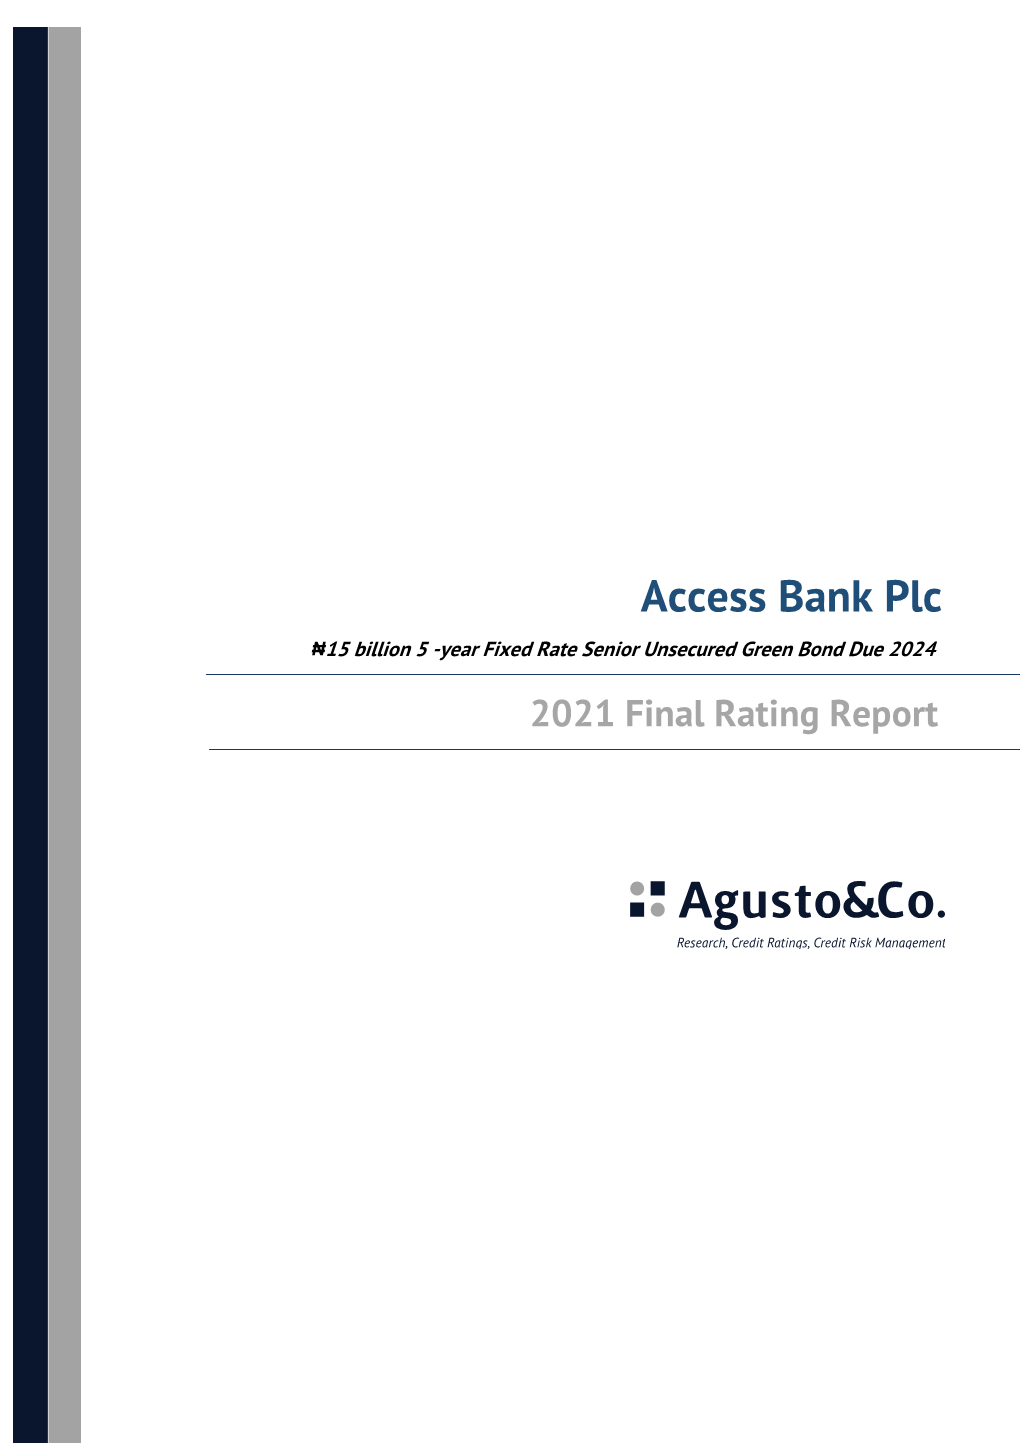 Access Bank Plc ₦15 Billion 5 -Year Fixed Rate Senior Unsecured Green Bond Due 2024 2021 Final Rating Report